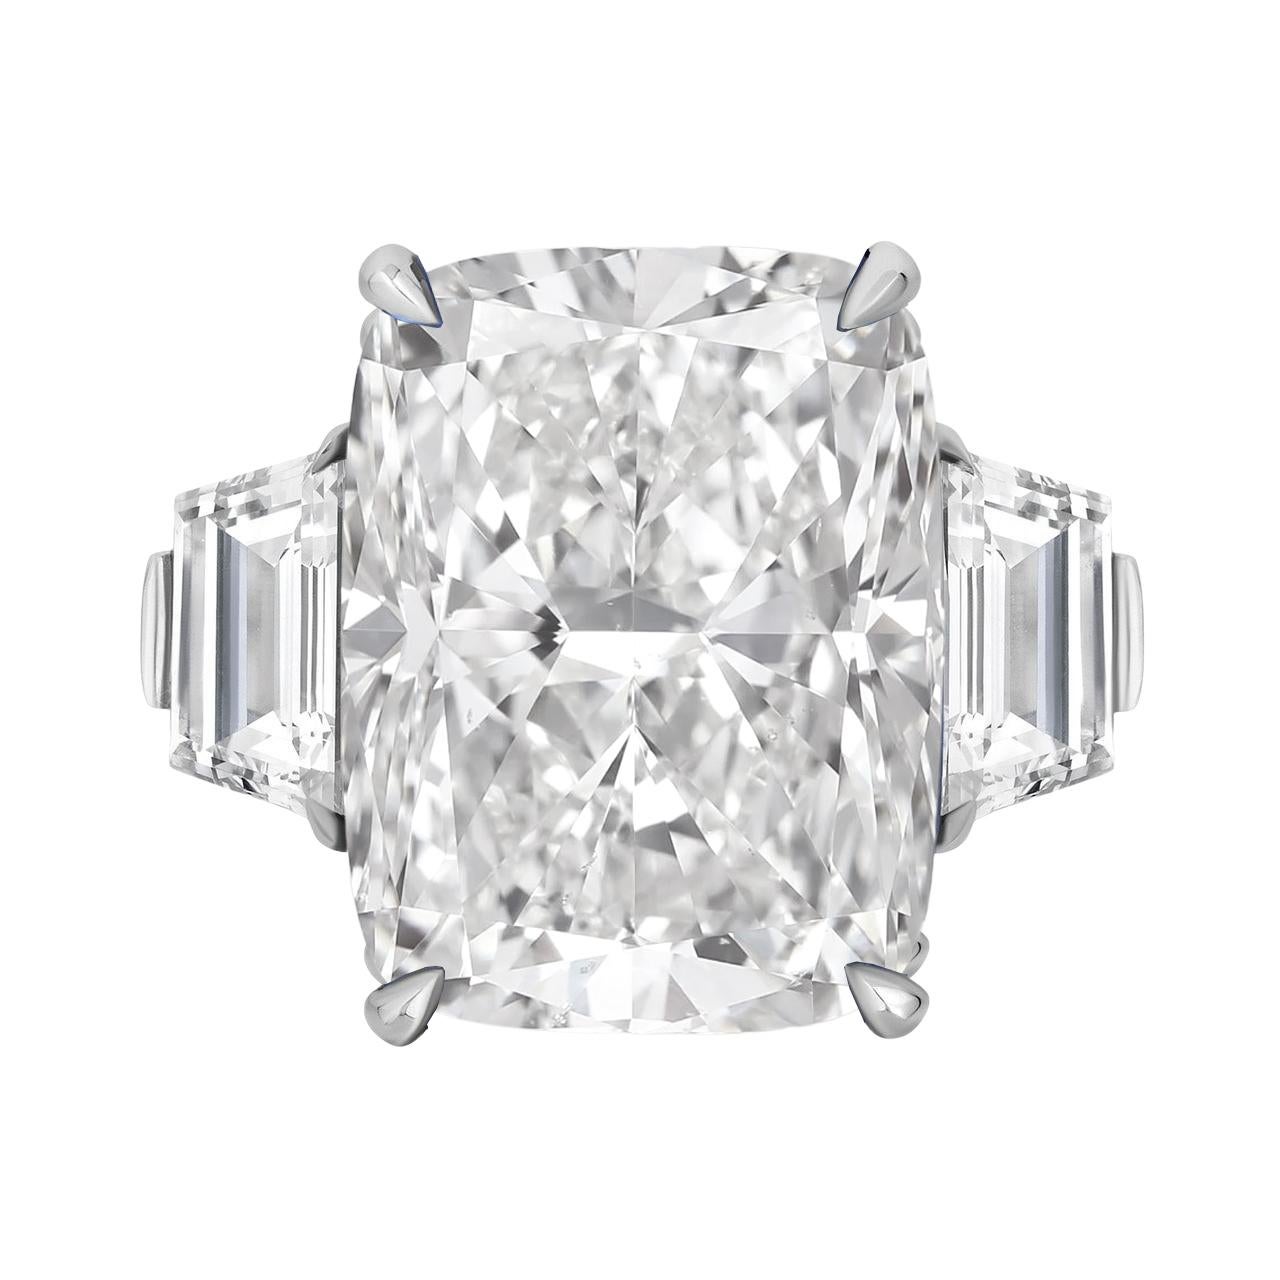 This remarkable engagement ring features a dazzling 8 carat cushion-cut diamond, certified by the Gemological Institute of America (GIA). Set in a sophisticated platinum band, this ring radiates timeless elegance and luxury. The centerpiece diamond